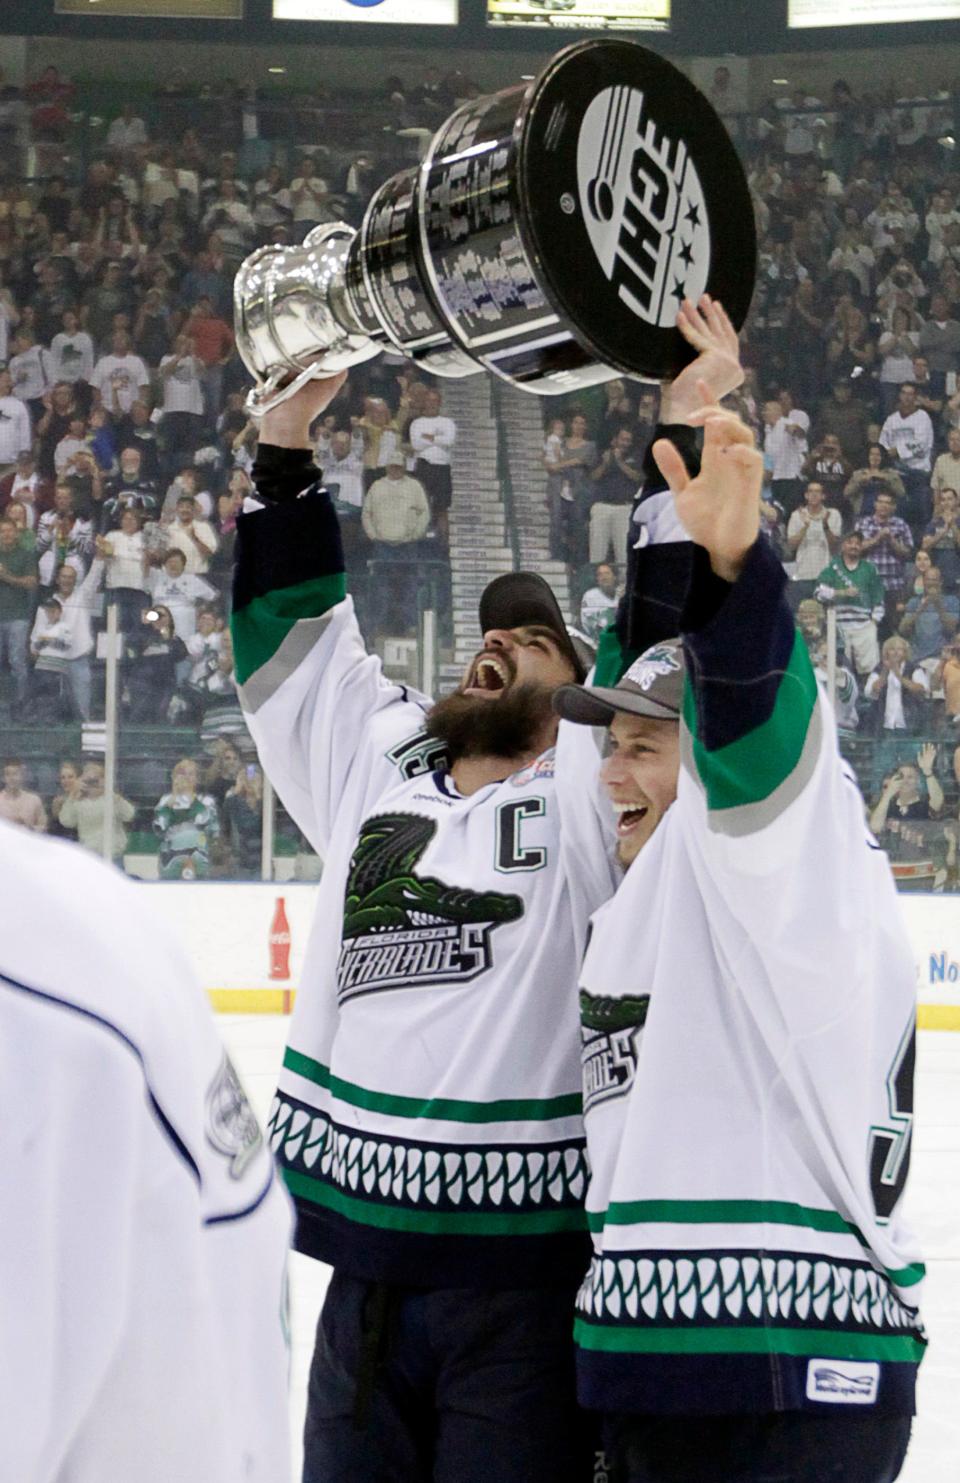 Everblades captain Mathieu Roy (15) holds the Kelly Cup after the Everblades won 3-2 in overtime clinching their first ECHL Kelly Cup over Las Vegas at Germain Arena on Wednesday, May 23, 2012.